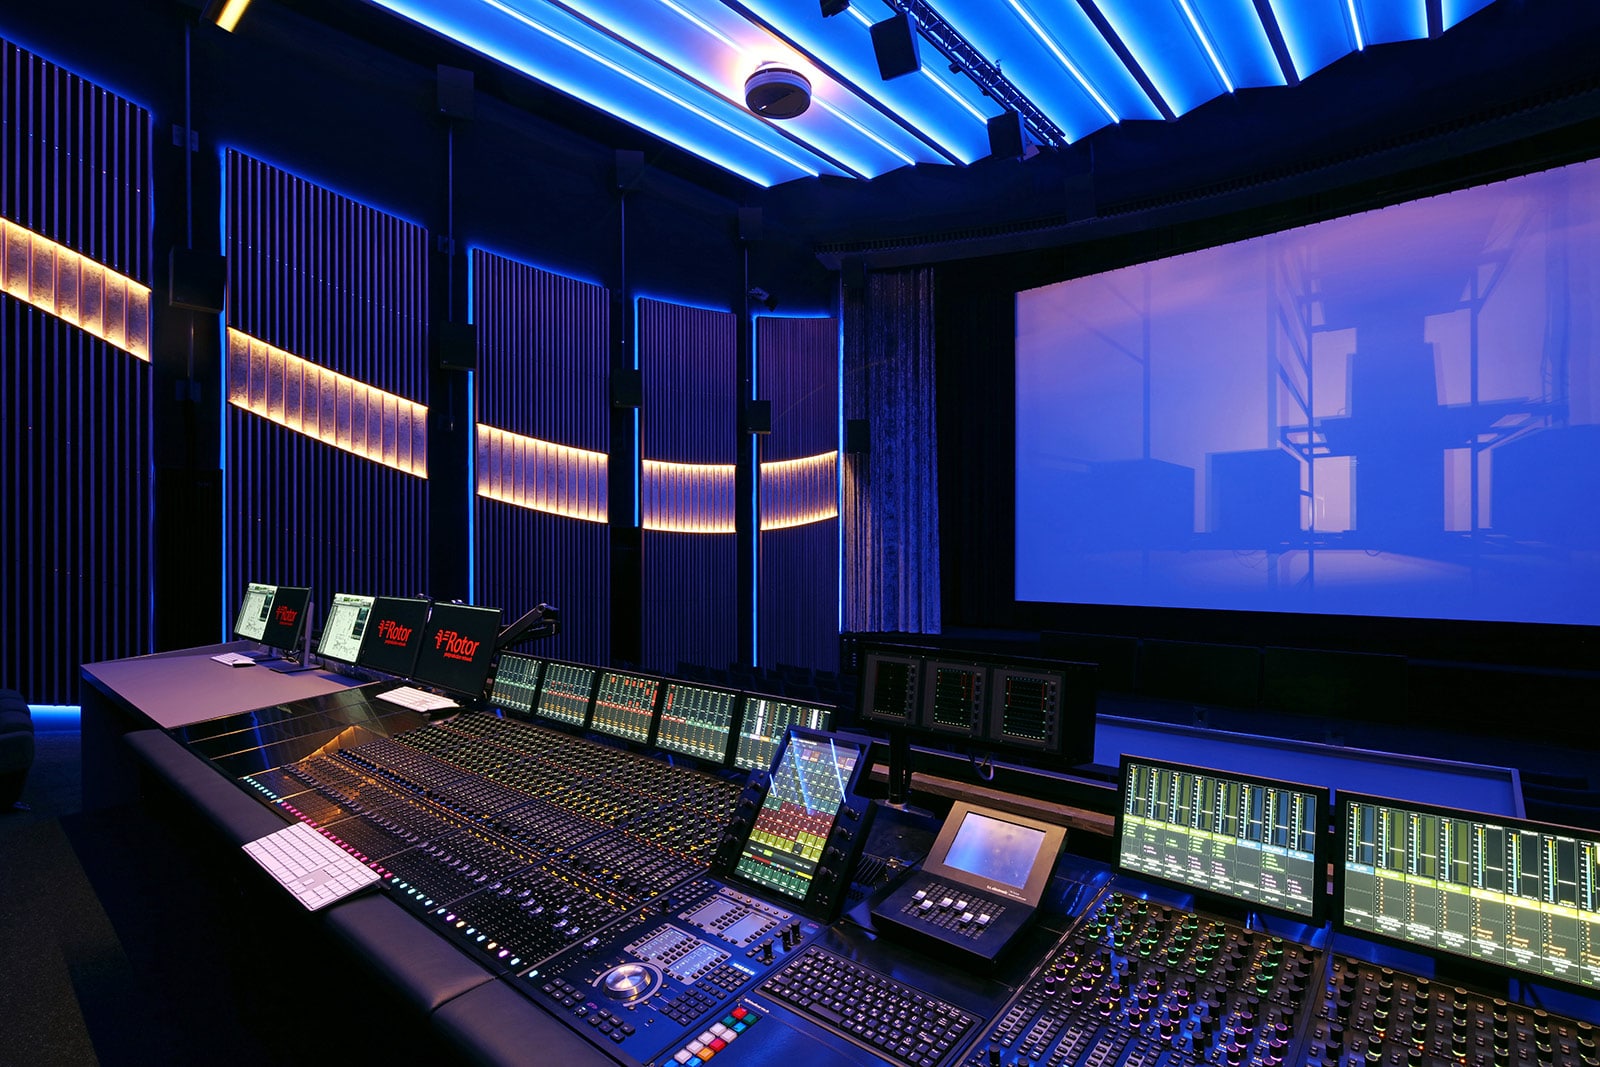 Germany's Rotor Film Selects Meyer Sound for Dolby Atmos and Auro-3D Mixing Stage